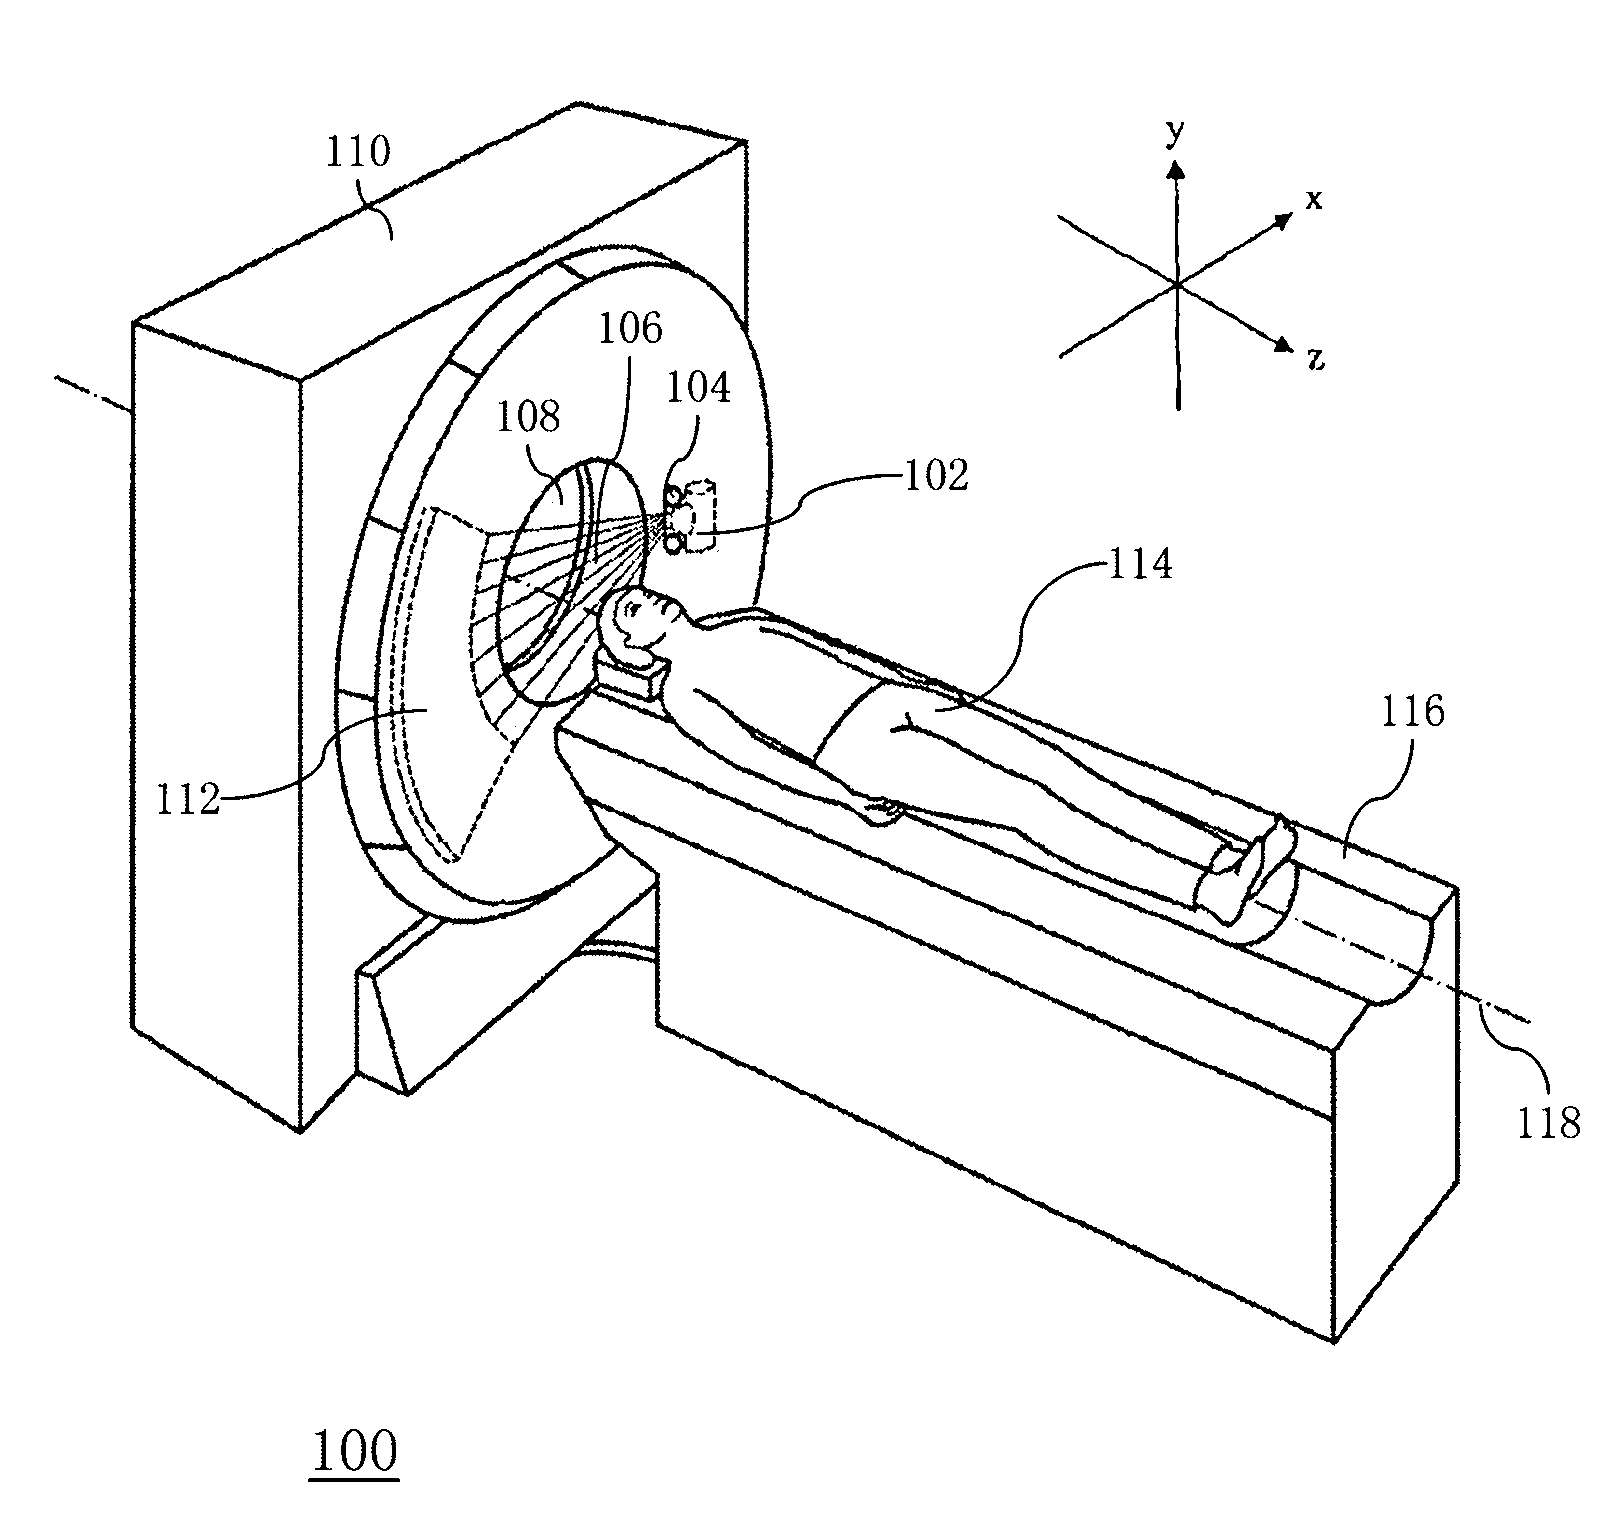 CT (computed tomography) imaging method and CT imaging system based on multi-mode Scout scanning